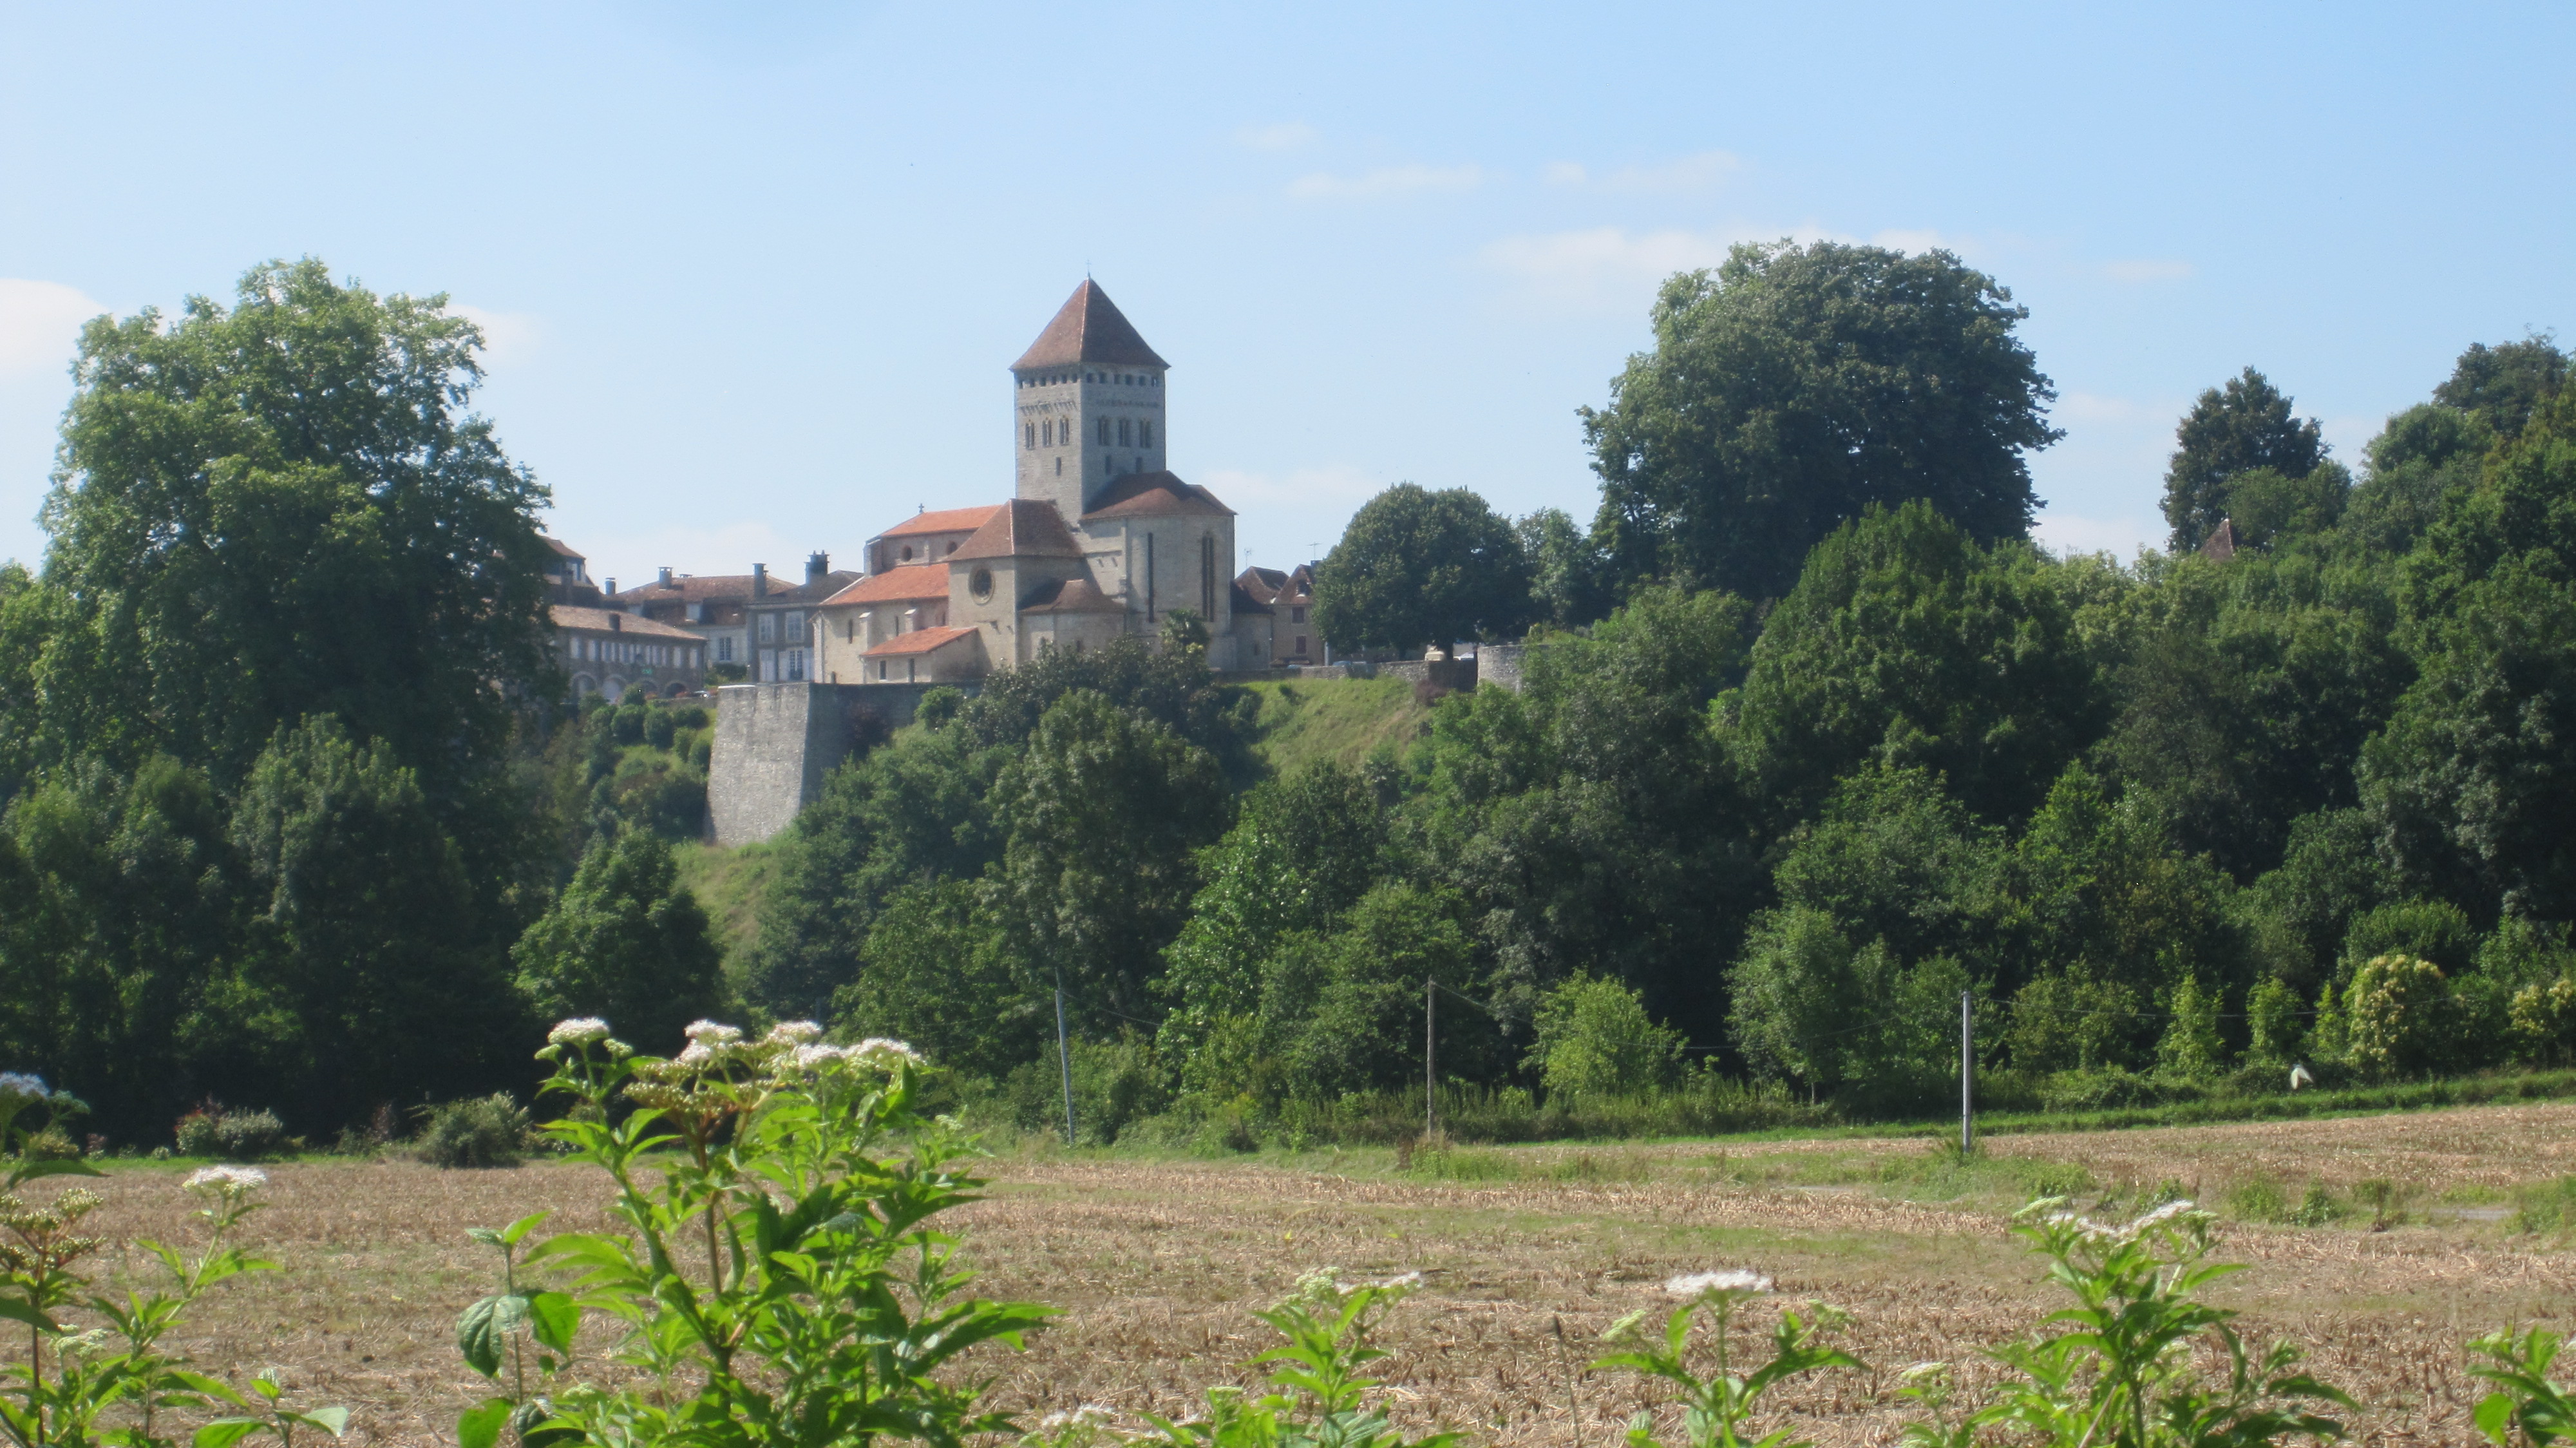 Approaching the town of Sauveterre-de Béarn